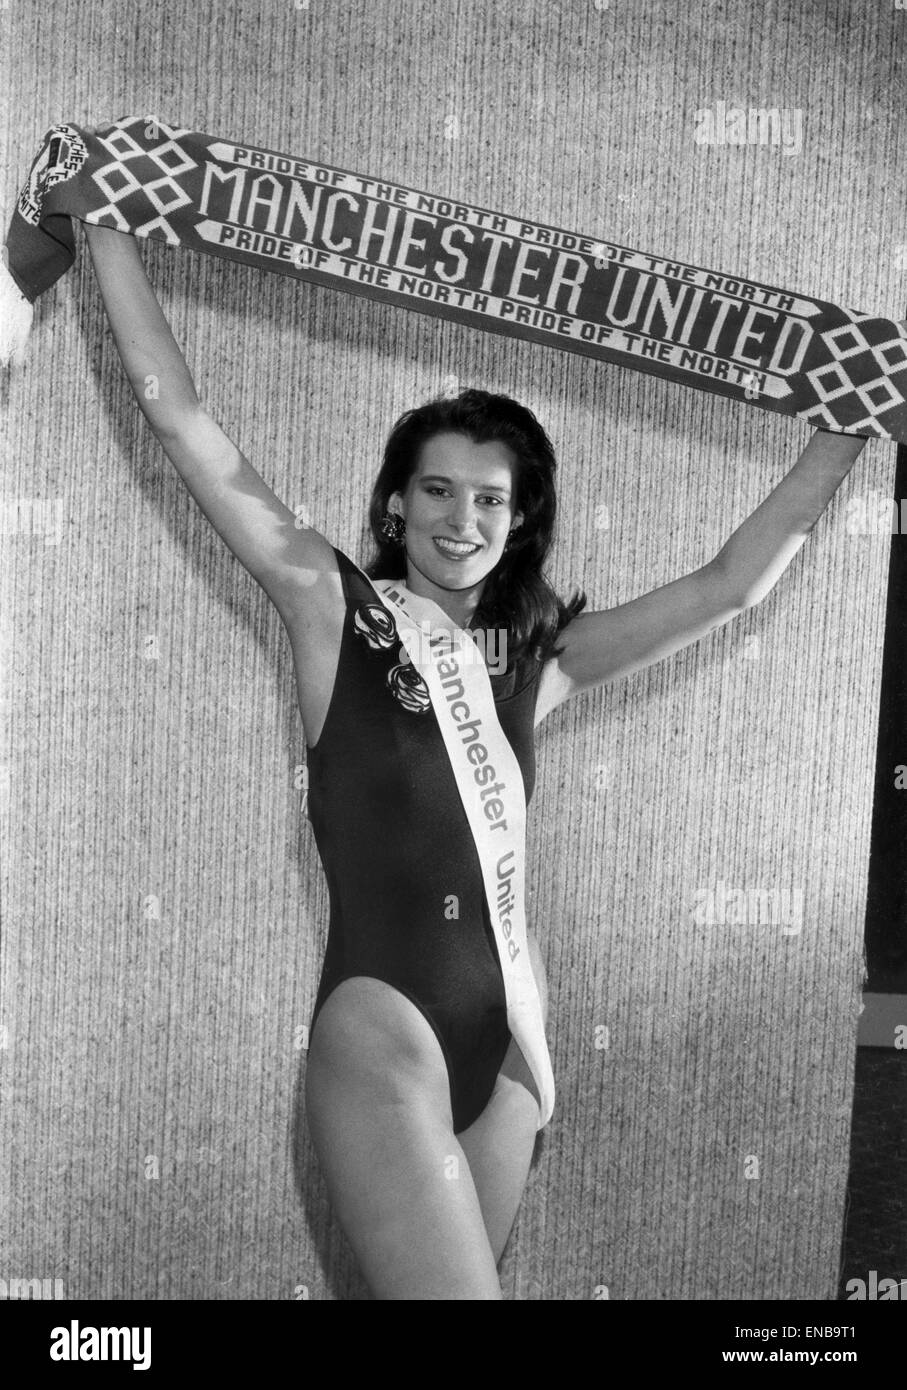 Hayley Worral aged 20 of Warrington, the new Miss Manchester United, holds up a club scarf after being selected at a gala black tie charity dinner at Old Trafford. The money raised will go to Liverpool's Hillsborough relief fund. April 1989. Stock Photo